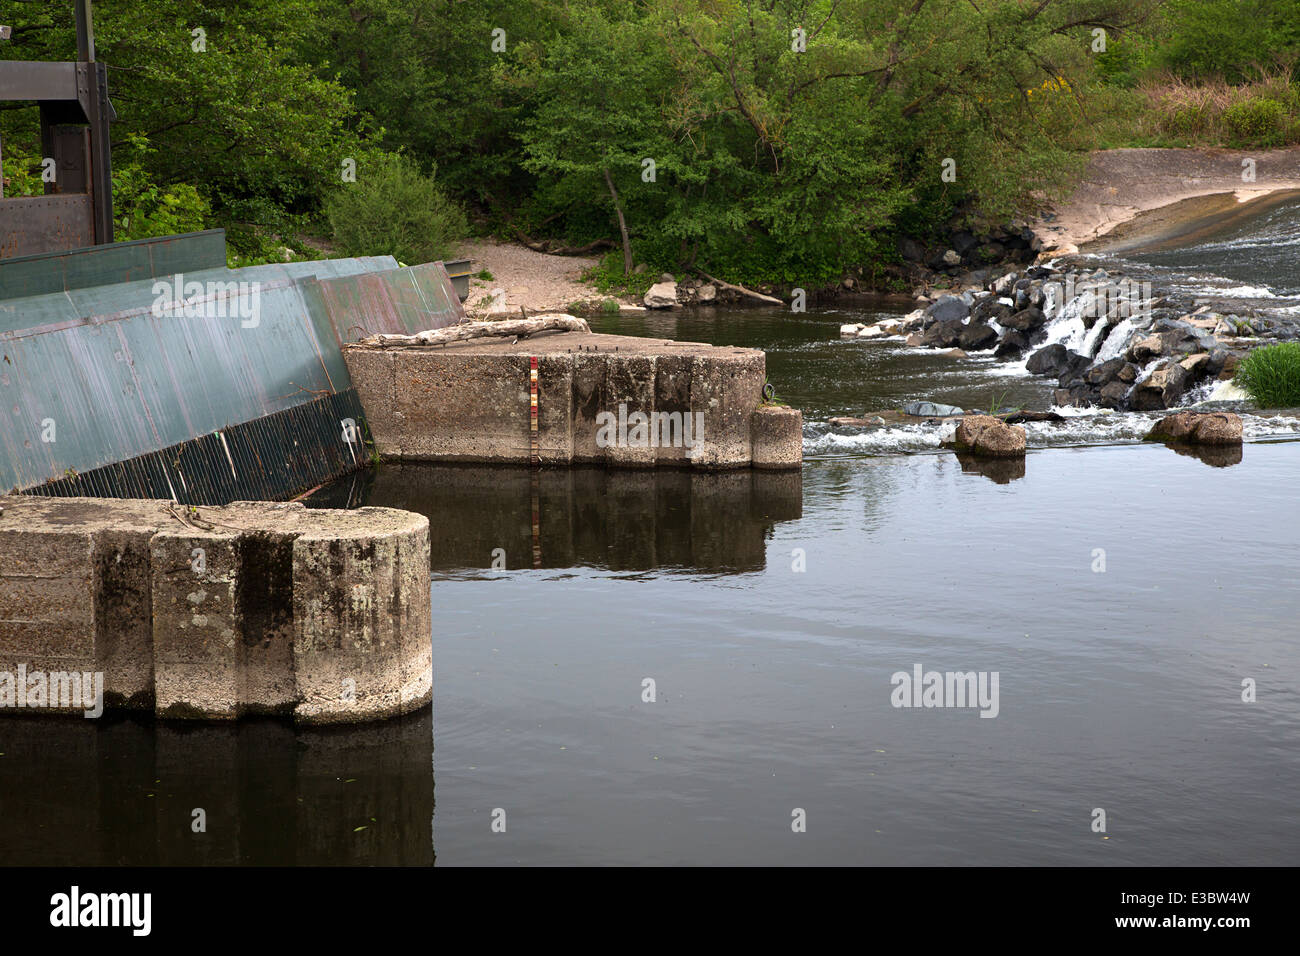 Inlet of hydro-electric power station in French river Moselle, Charmes, Lorraine, Vosges, France Stock Photo